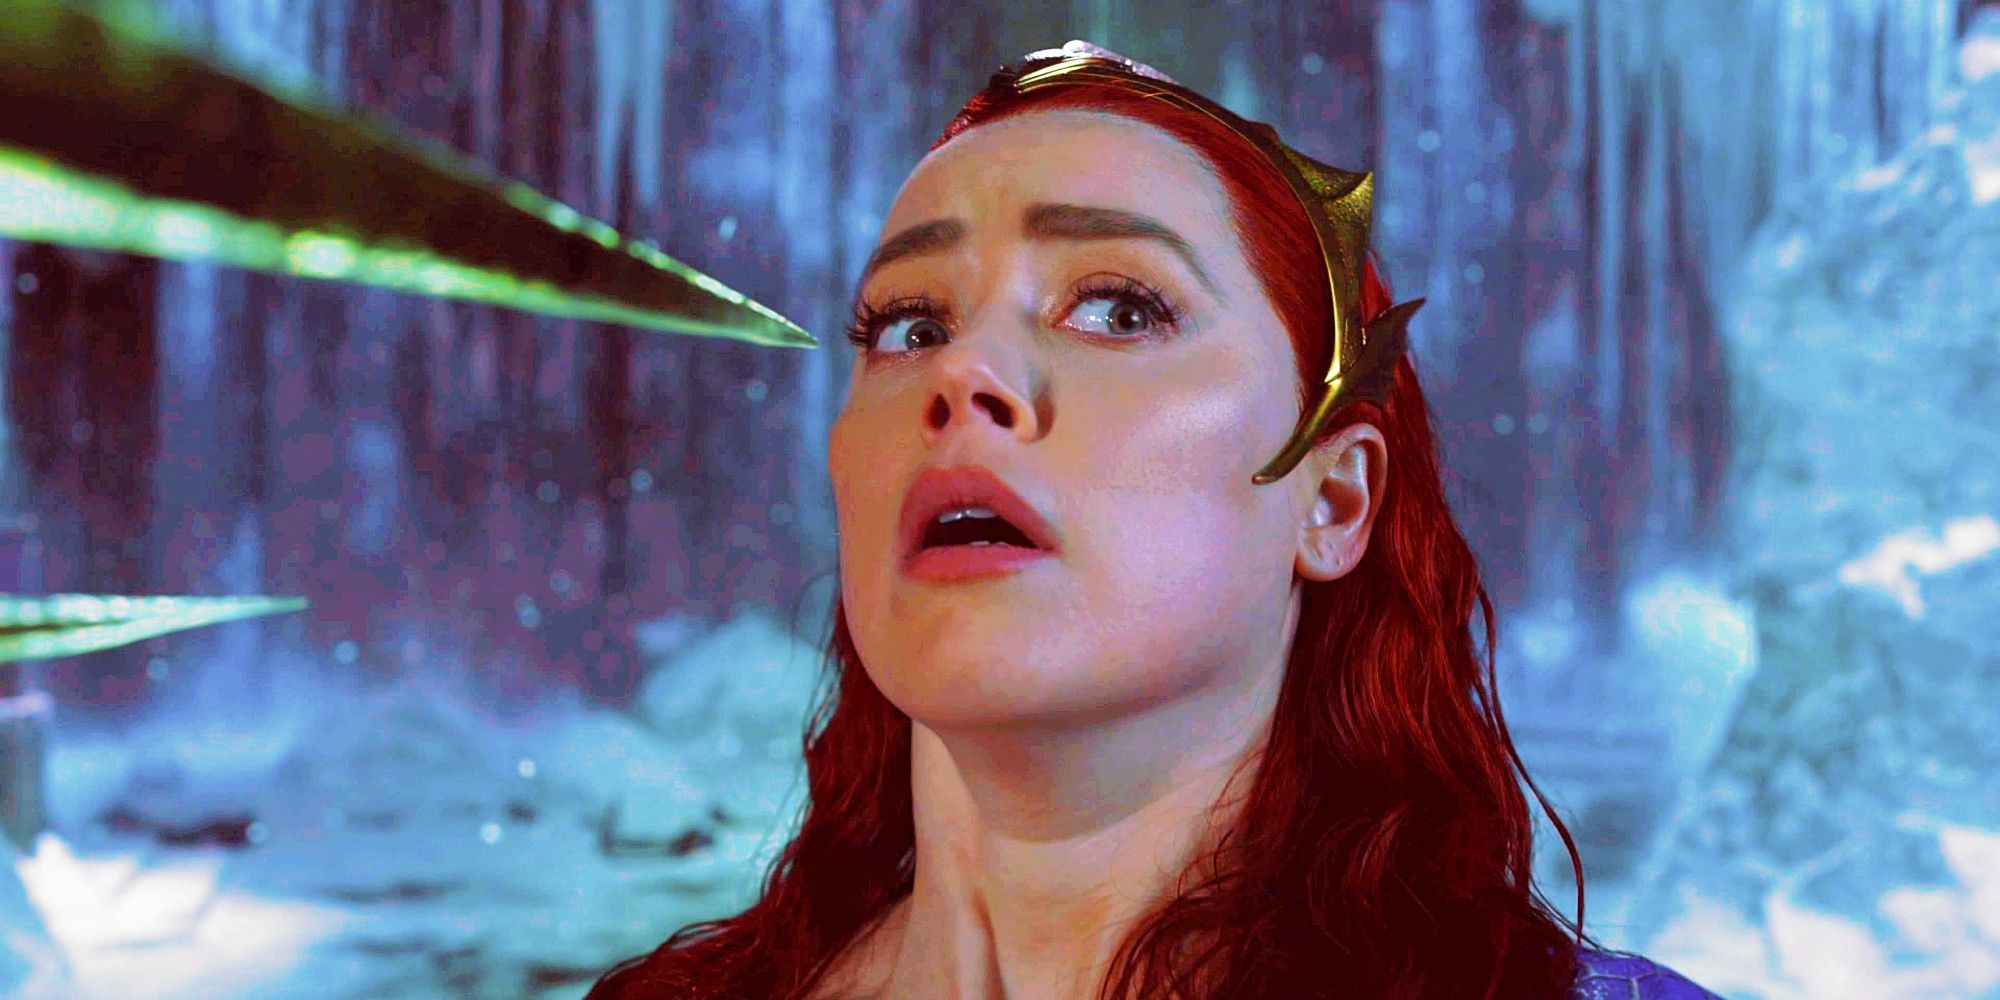 Amber Heard As Mera Being Threatened With A Spear In Aquaman and the Lost Kingdom